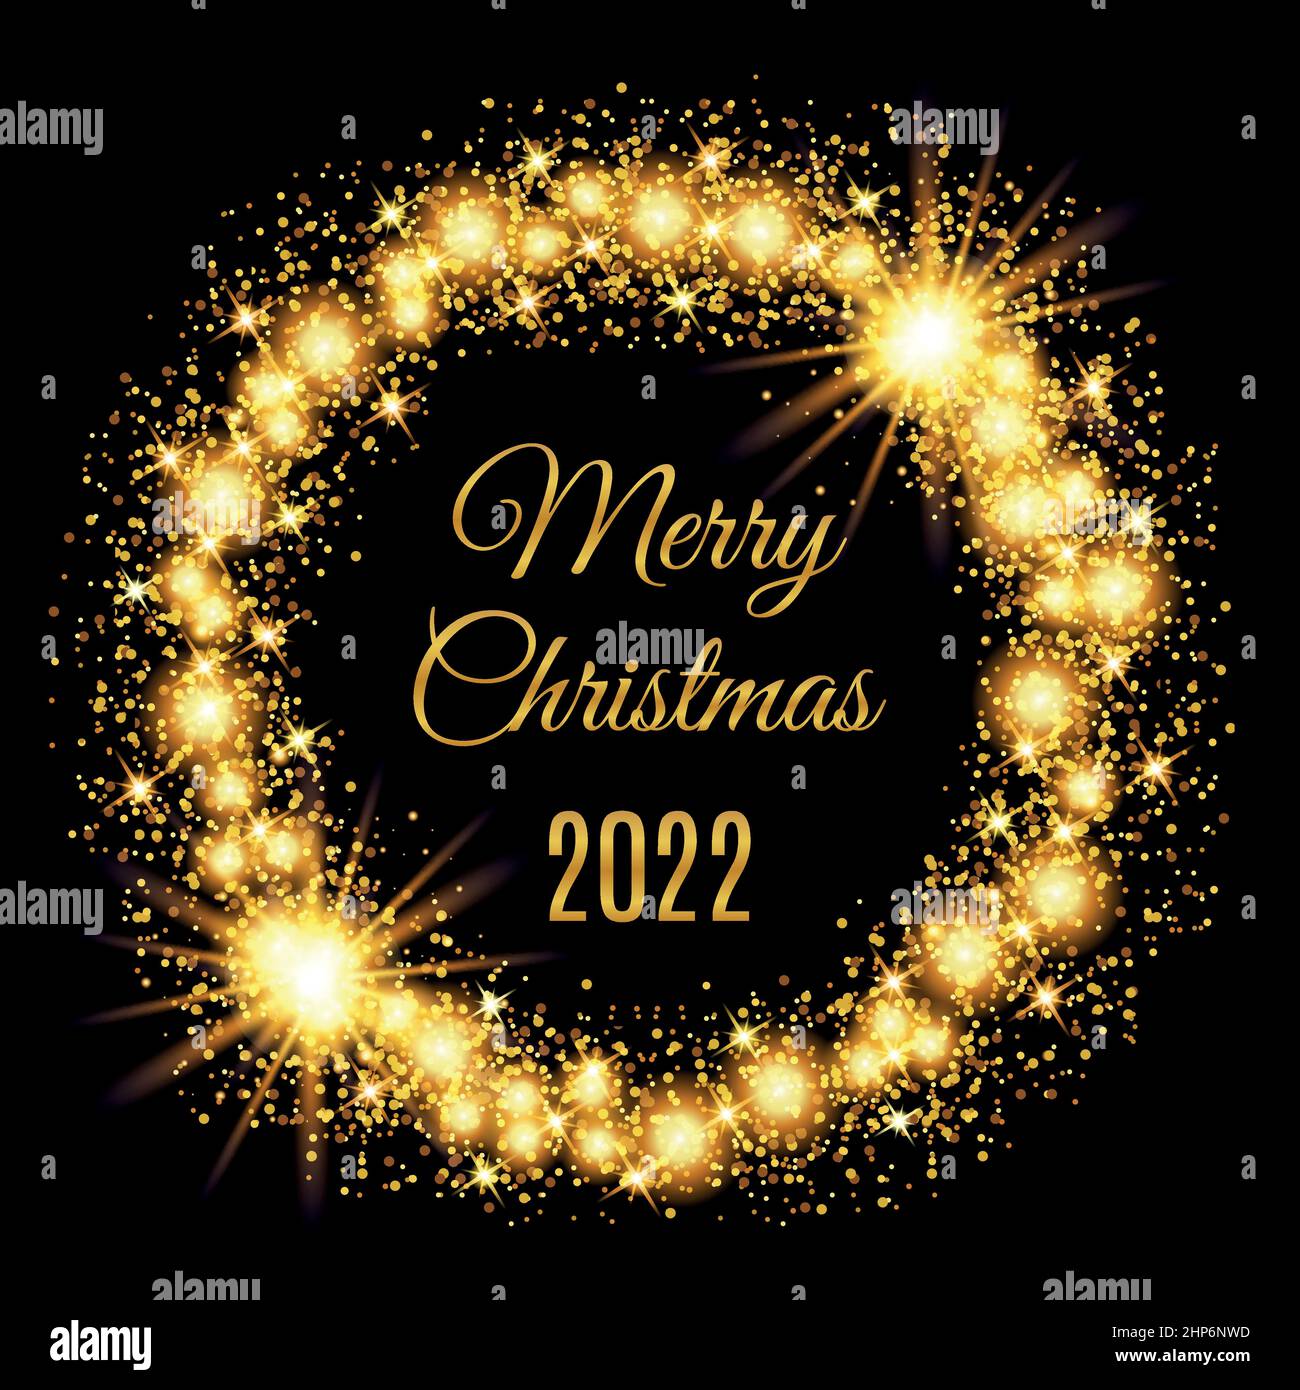 2022 Merry Christmas glowing gold background. Vector illustration Stock Vector